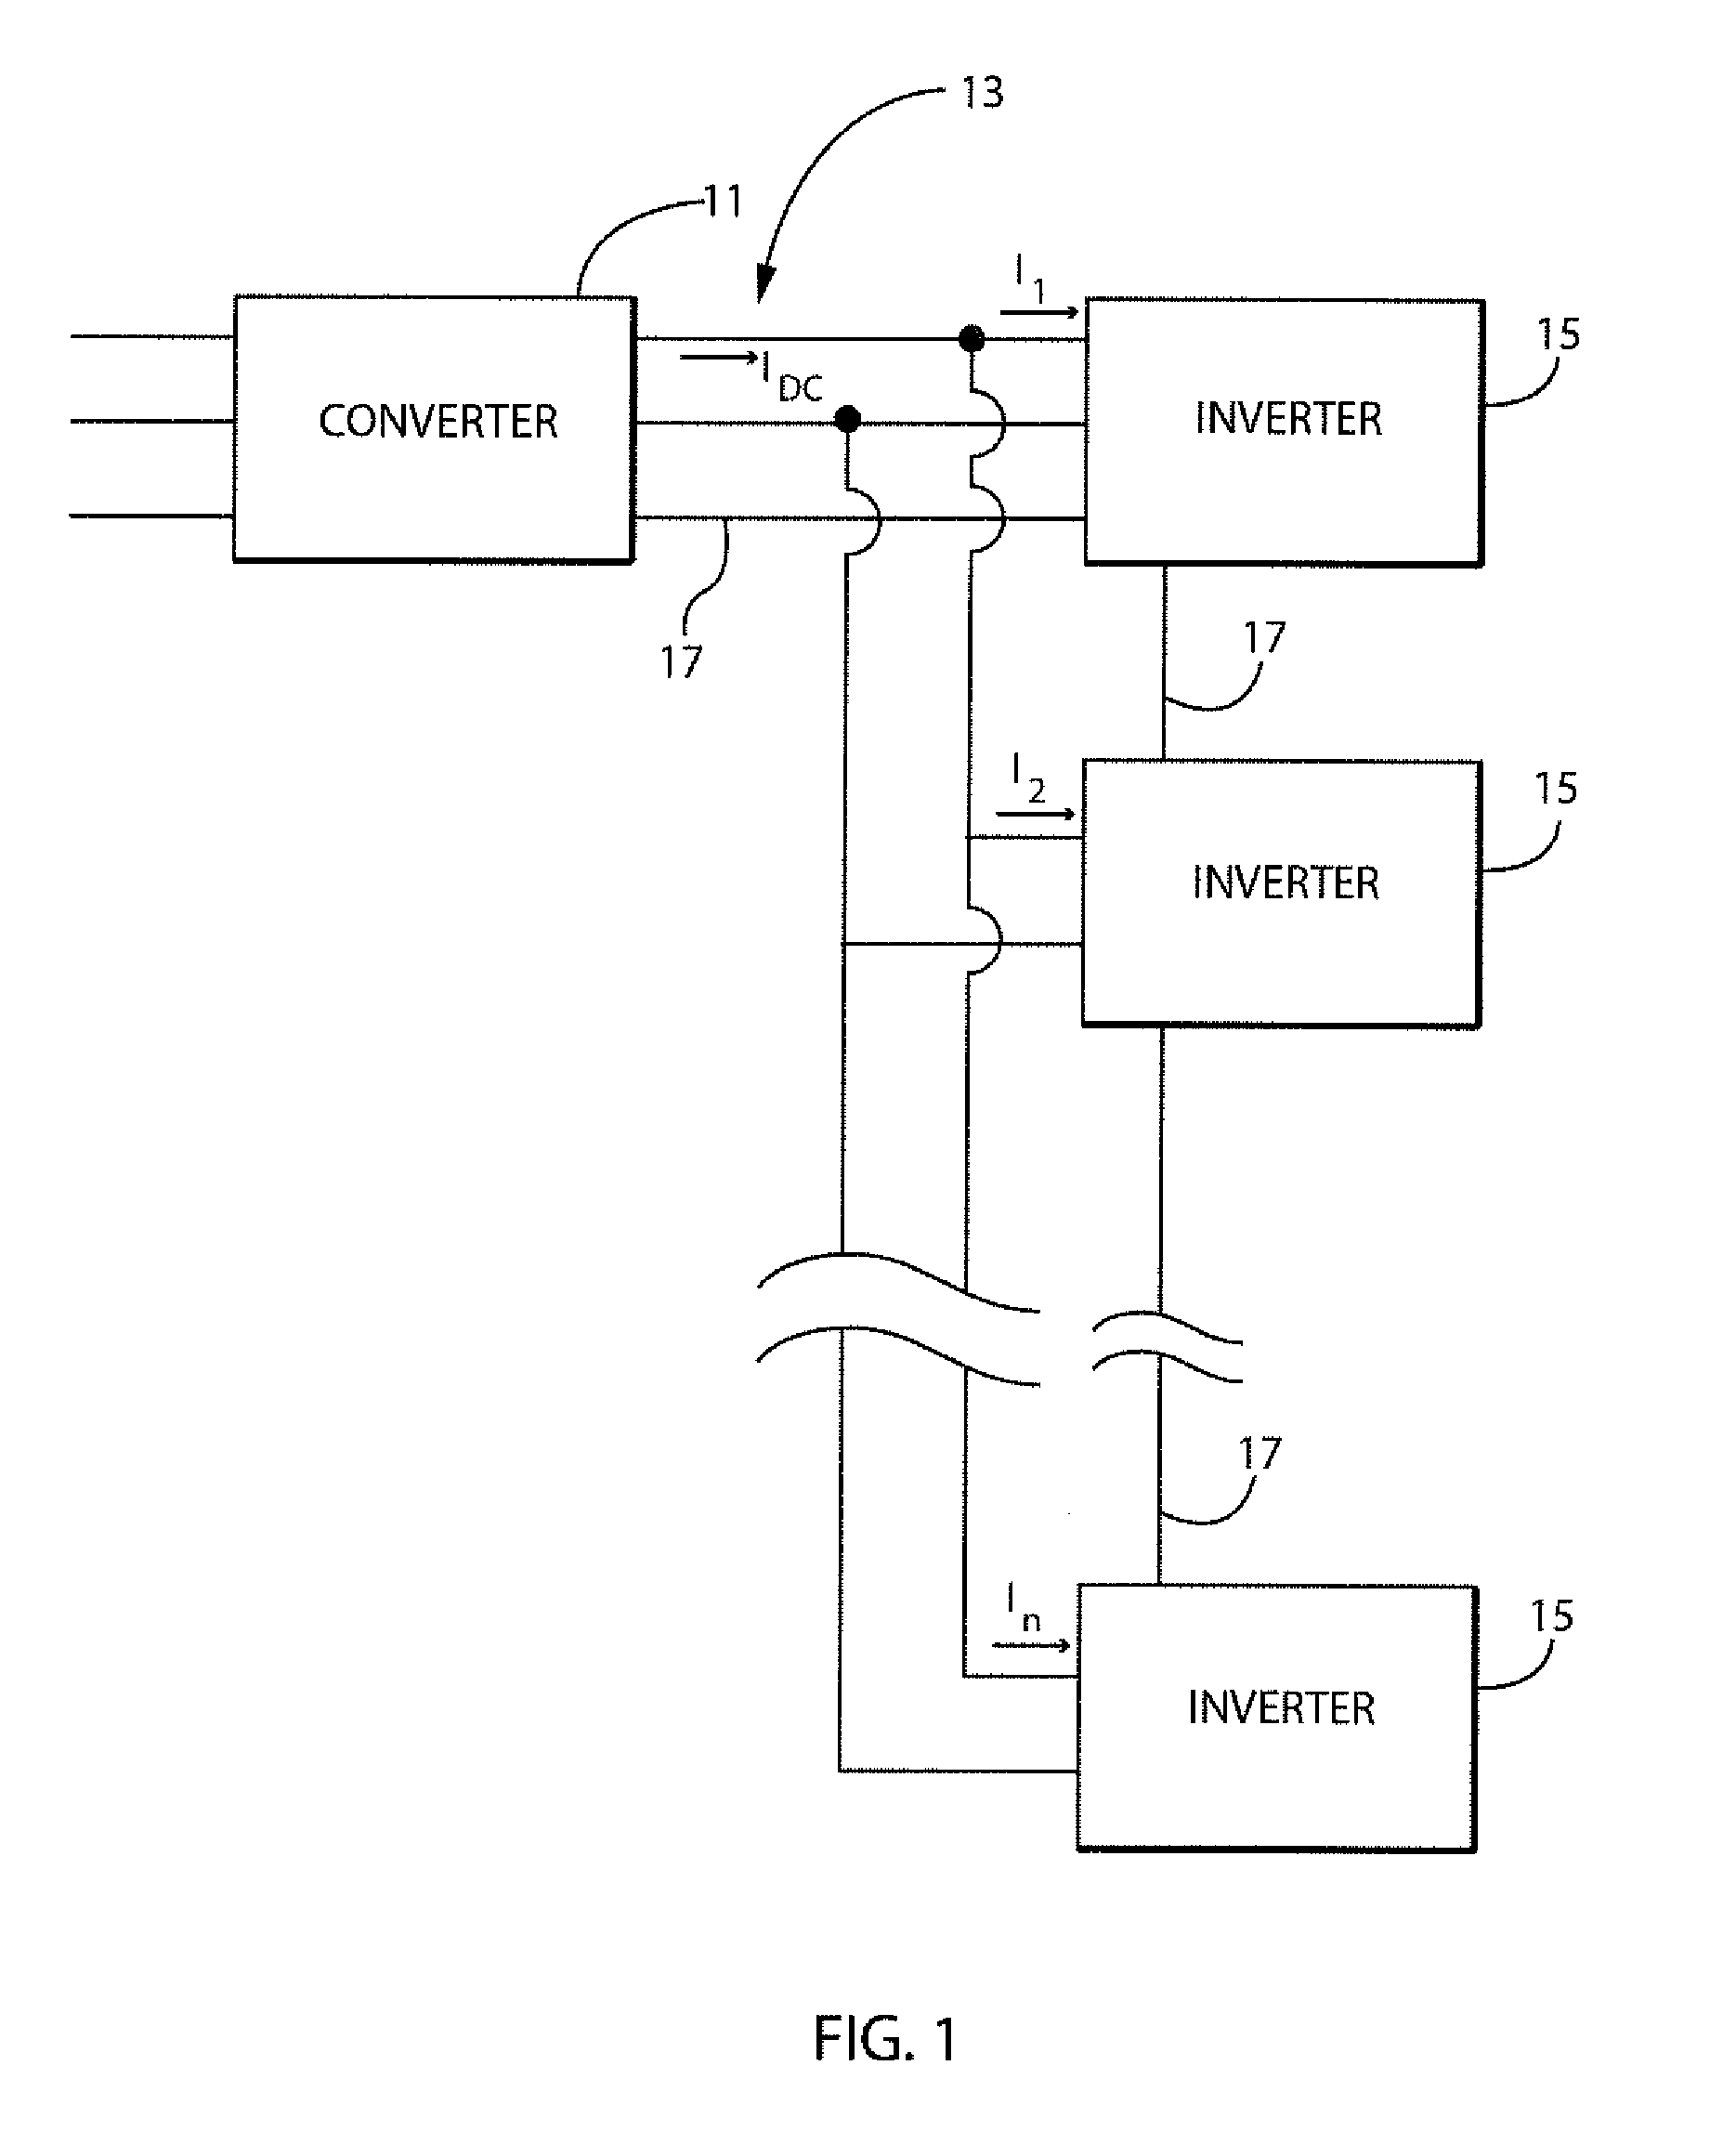 System and Method for Reducing Reactive Current on a Common DC Bus with Multiple Inverters